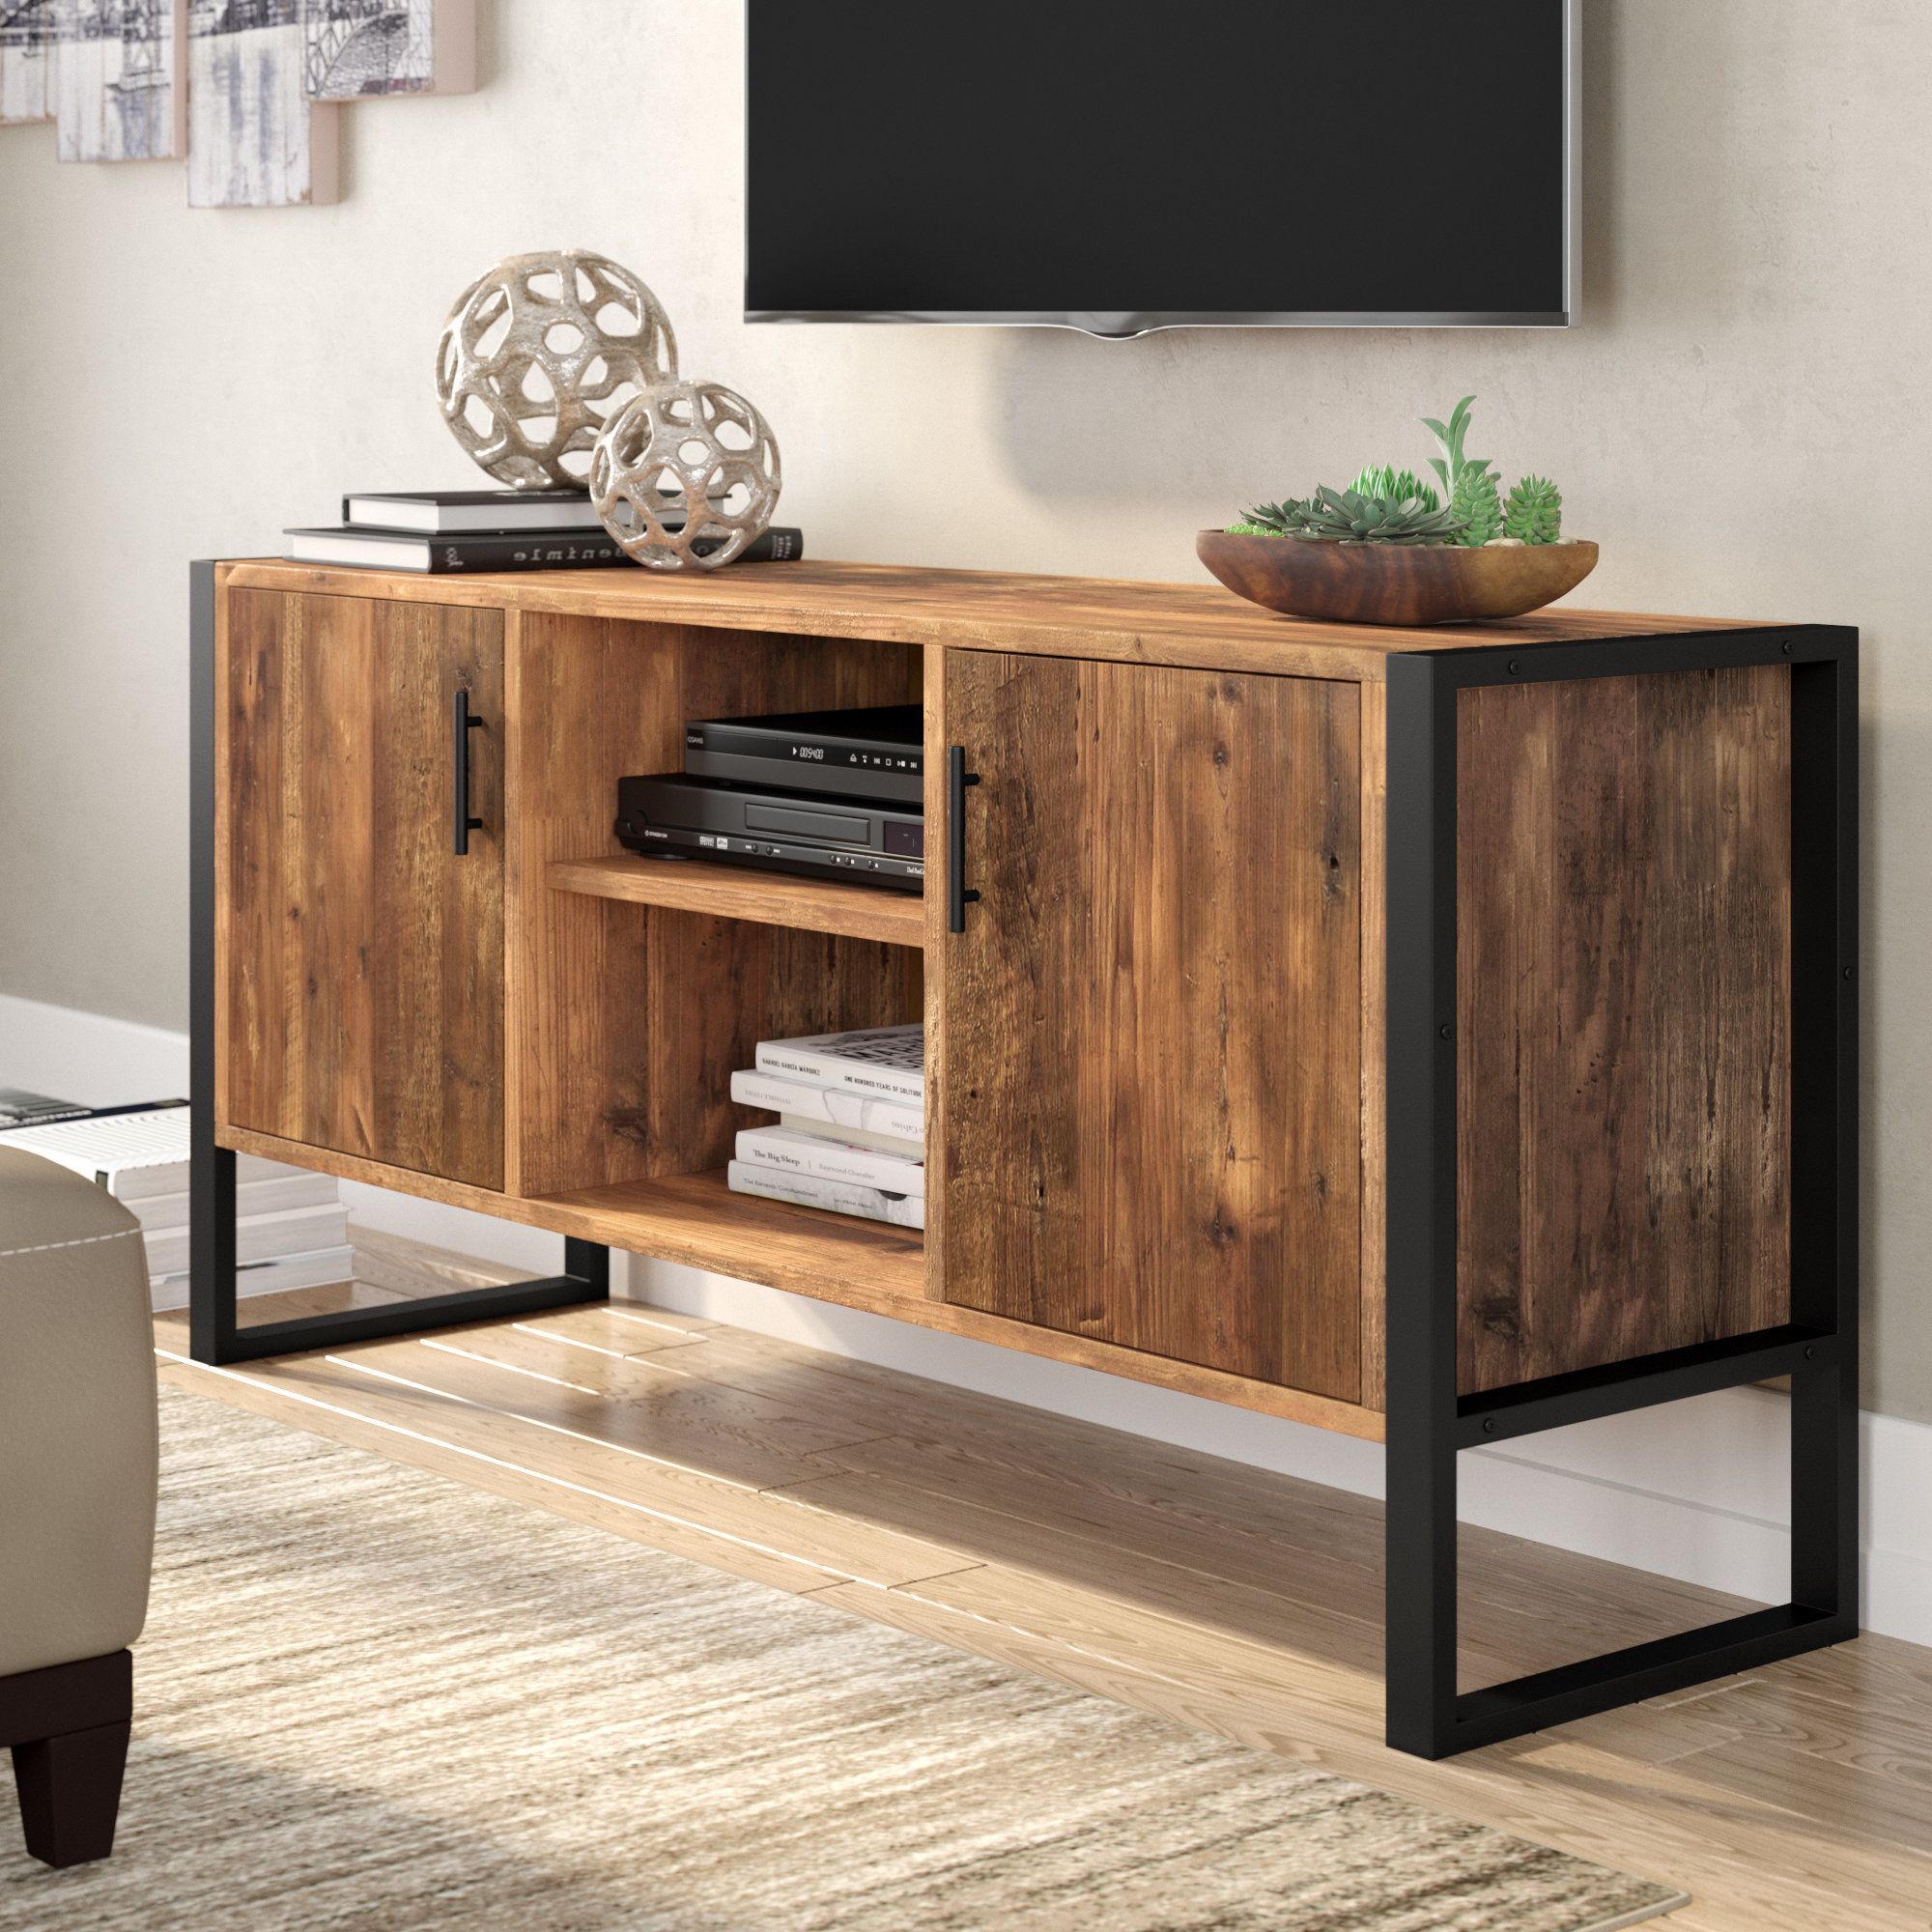 70 Inch Tv Stands | Joss & Main With Most Recently Released Creola 72" Tv Stands (View 2 of 6)